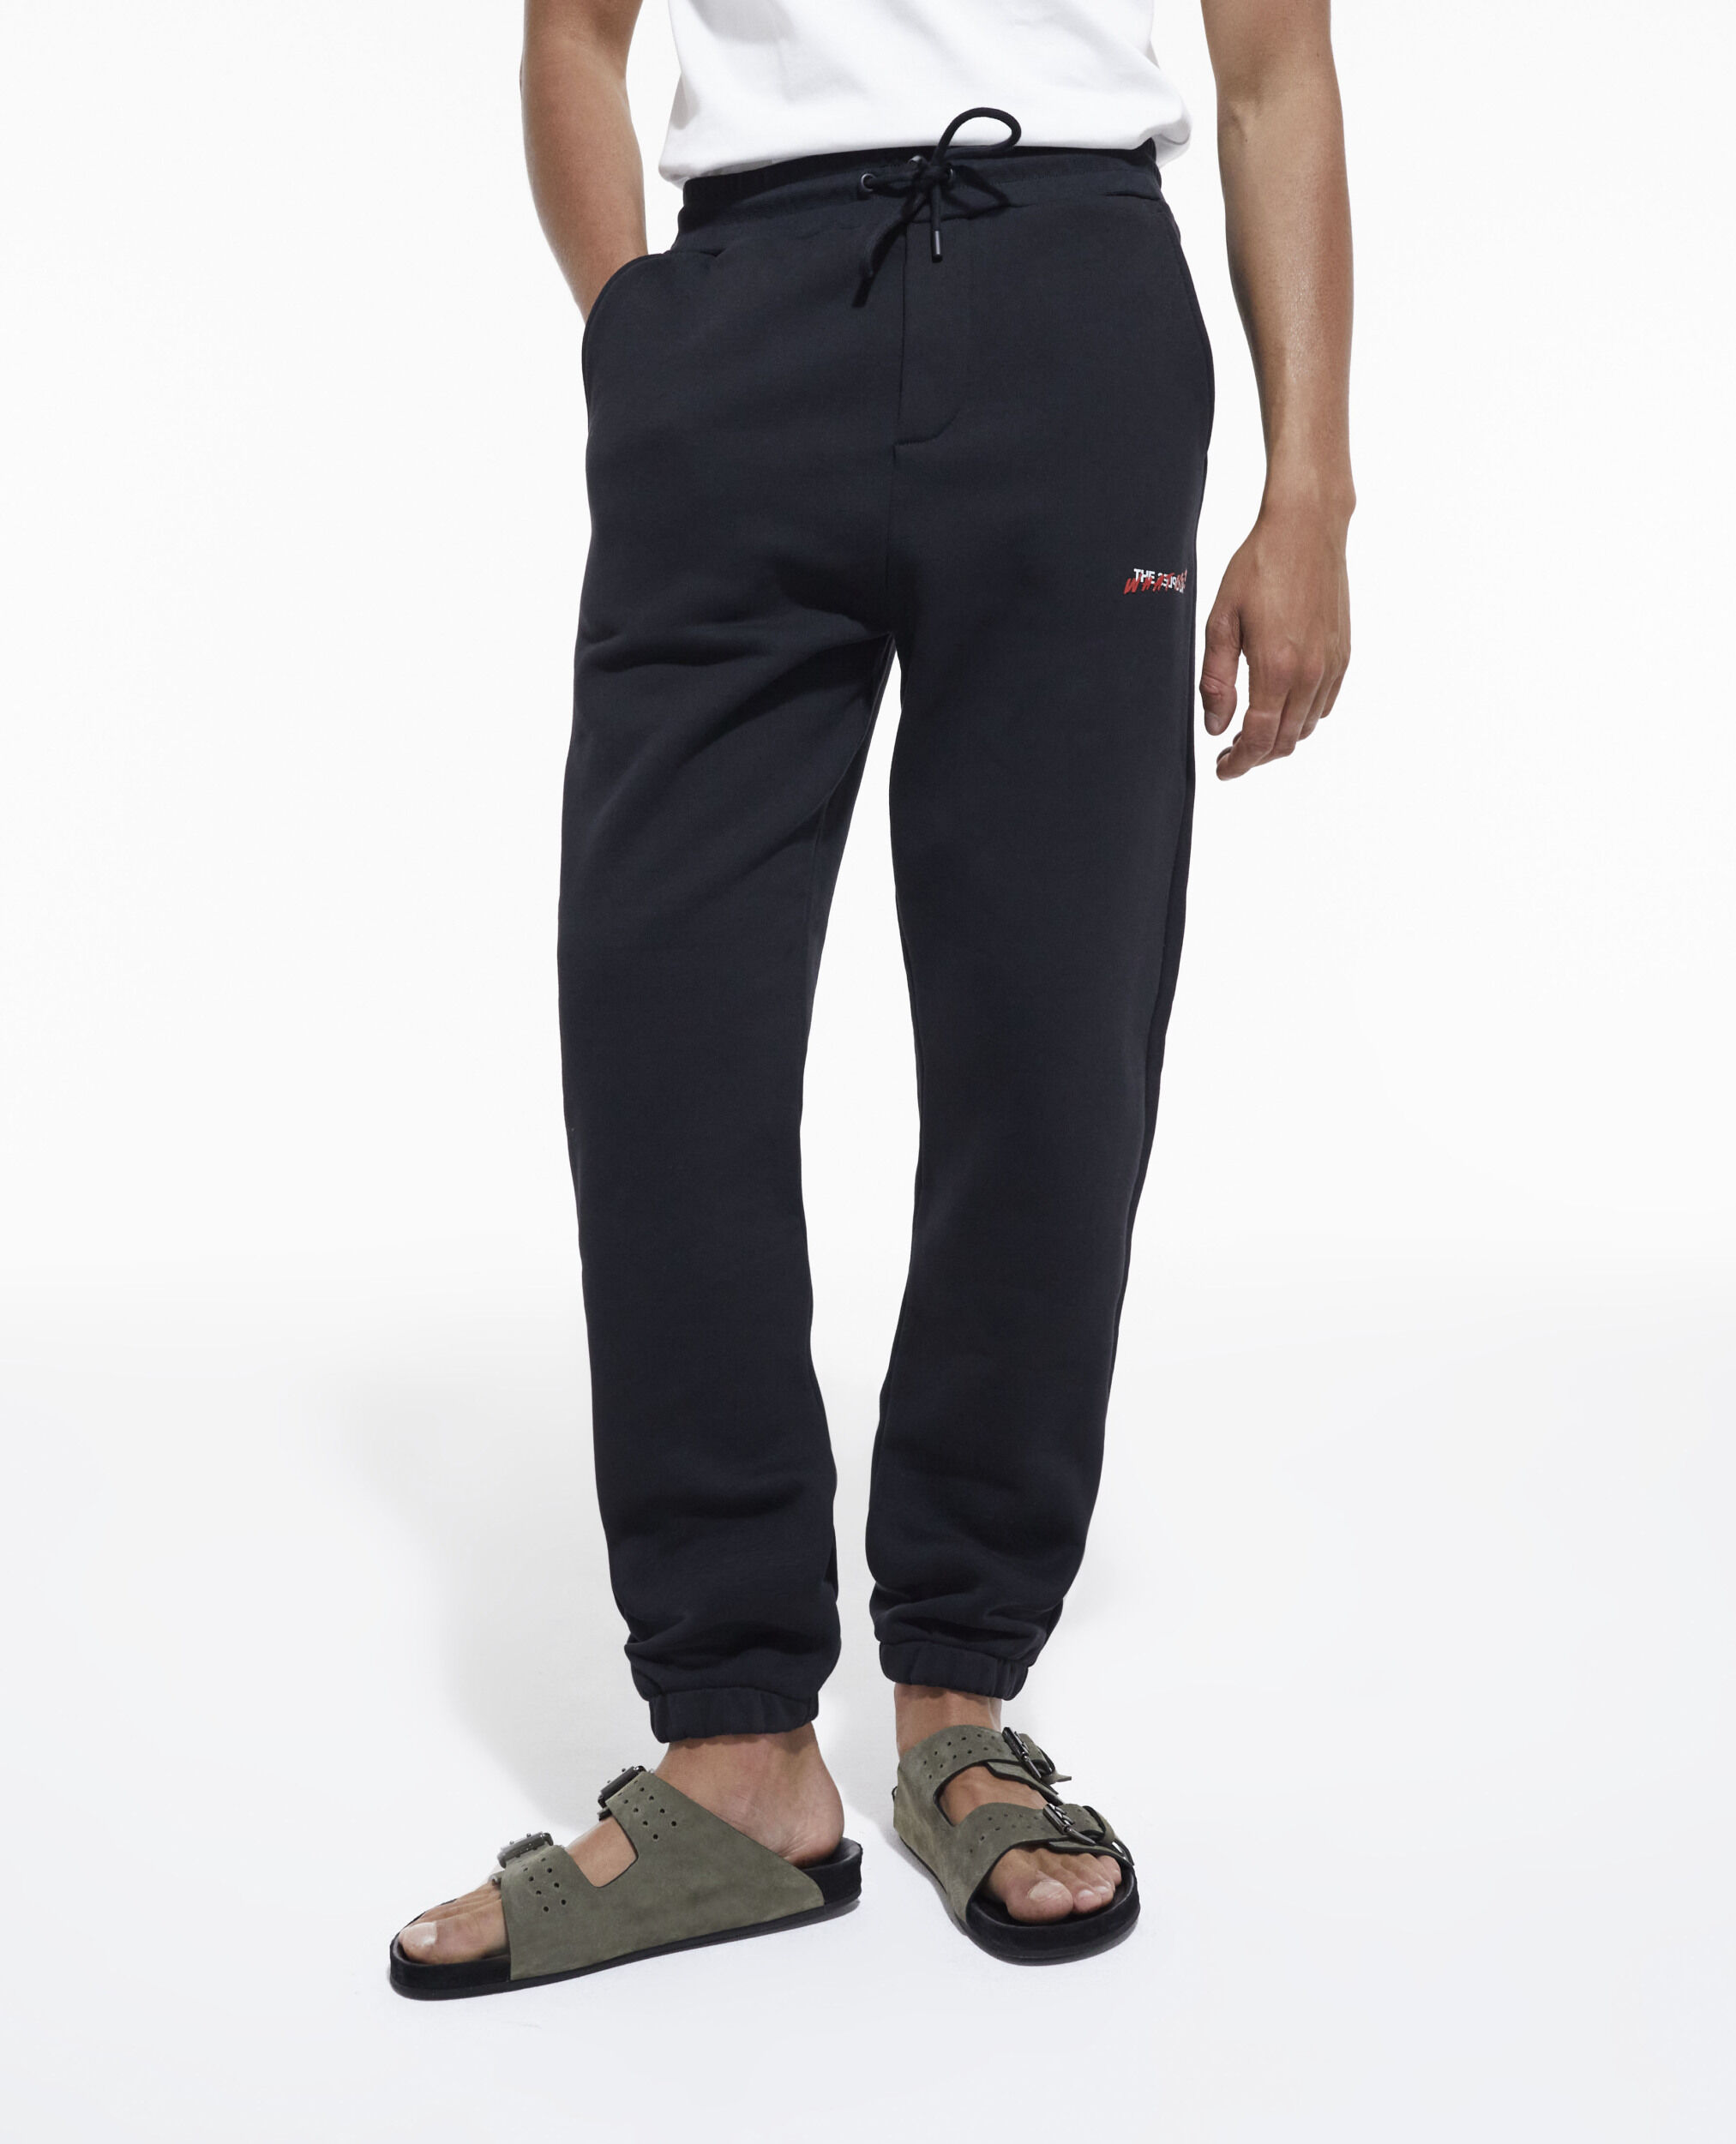 Black joggers with What is print, BLACK, hi-res image number null